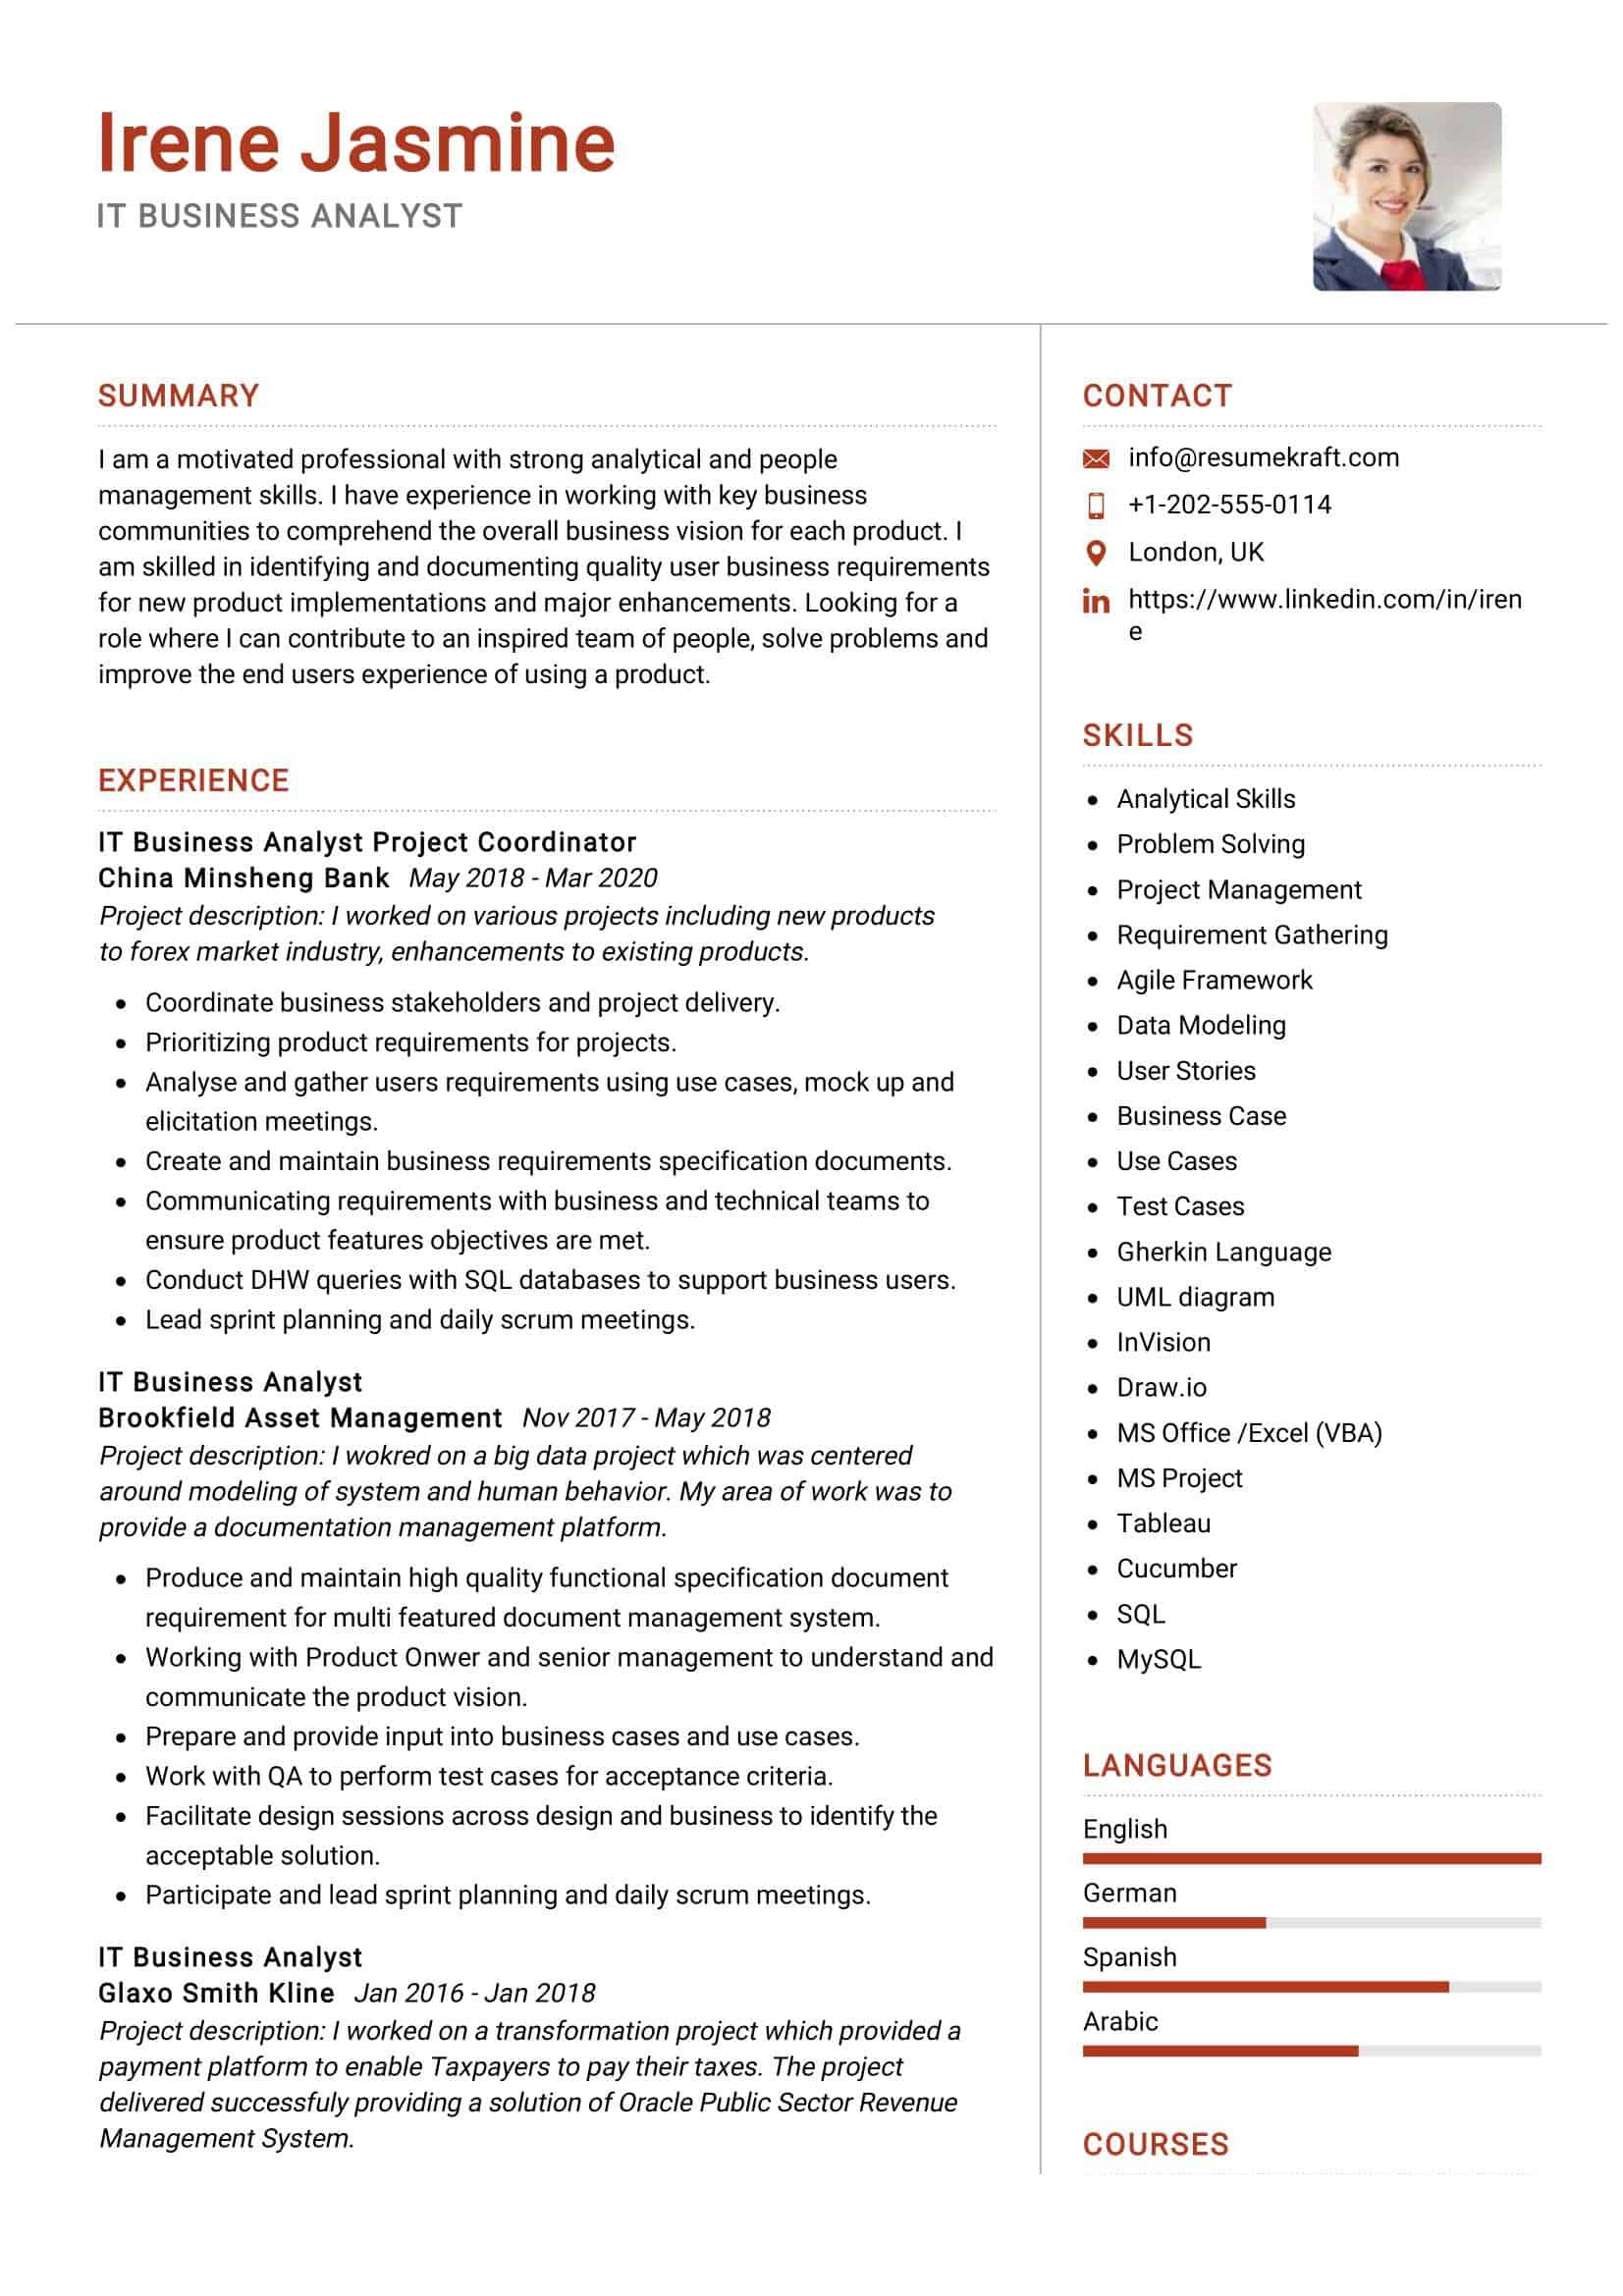 Sample Resume for Business Analyst with No Experience It Business Analyst Resume Sample 2021 Writing Tips – Resumekraft